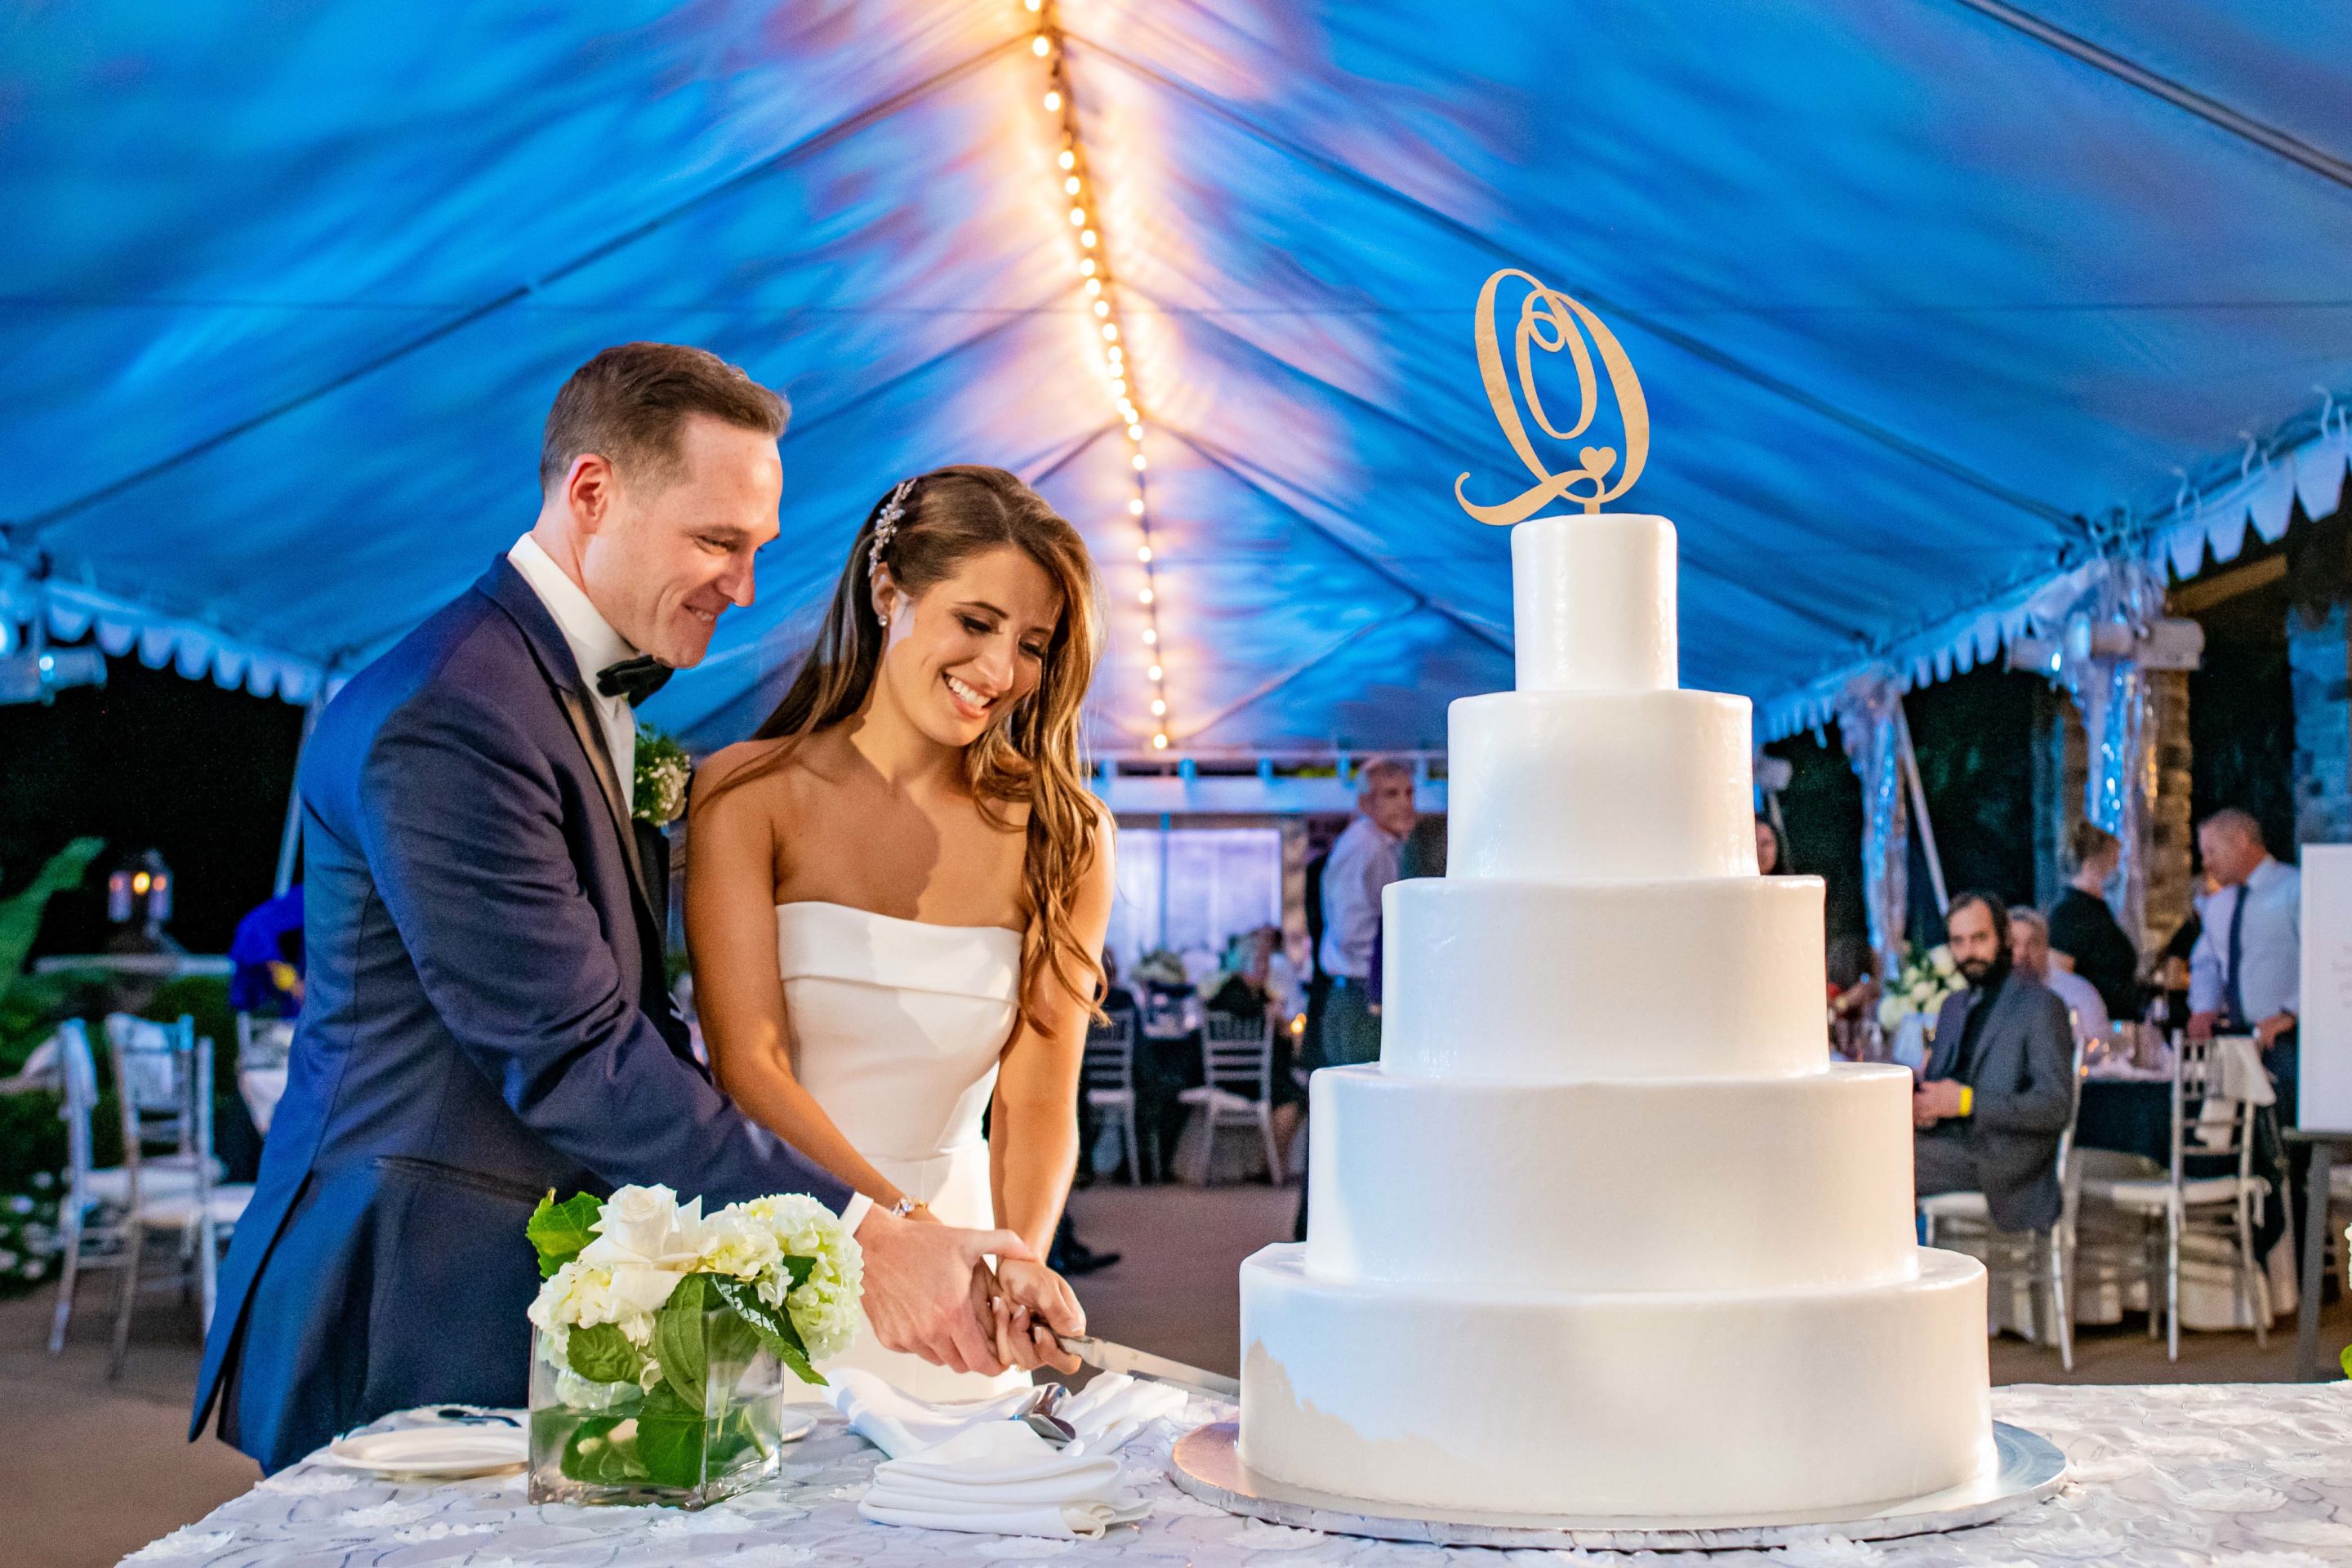 Bride and groom cutting their wedding cake under a lit canopy tent.